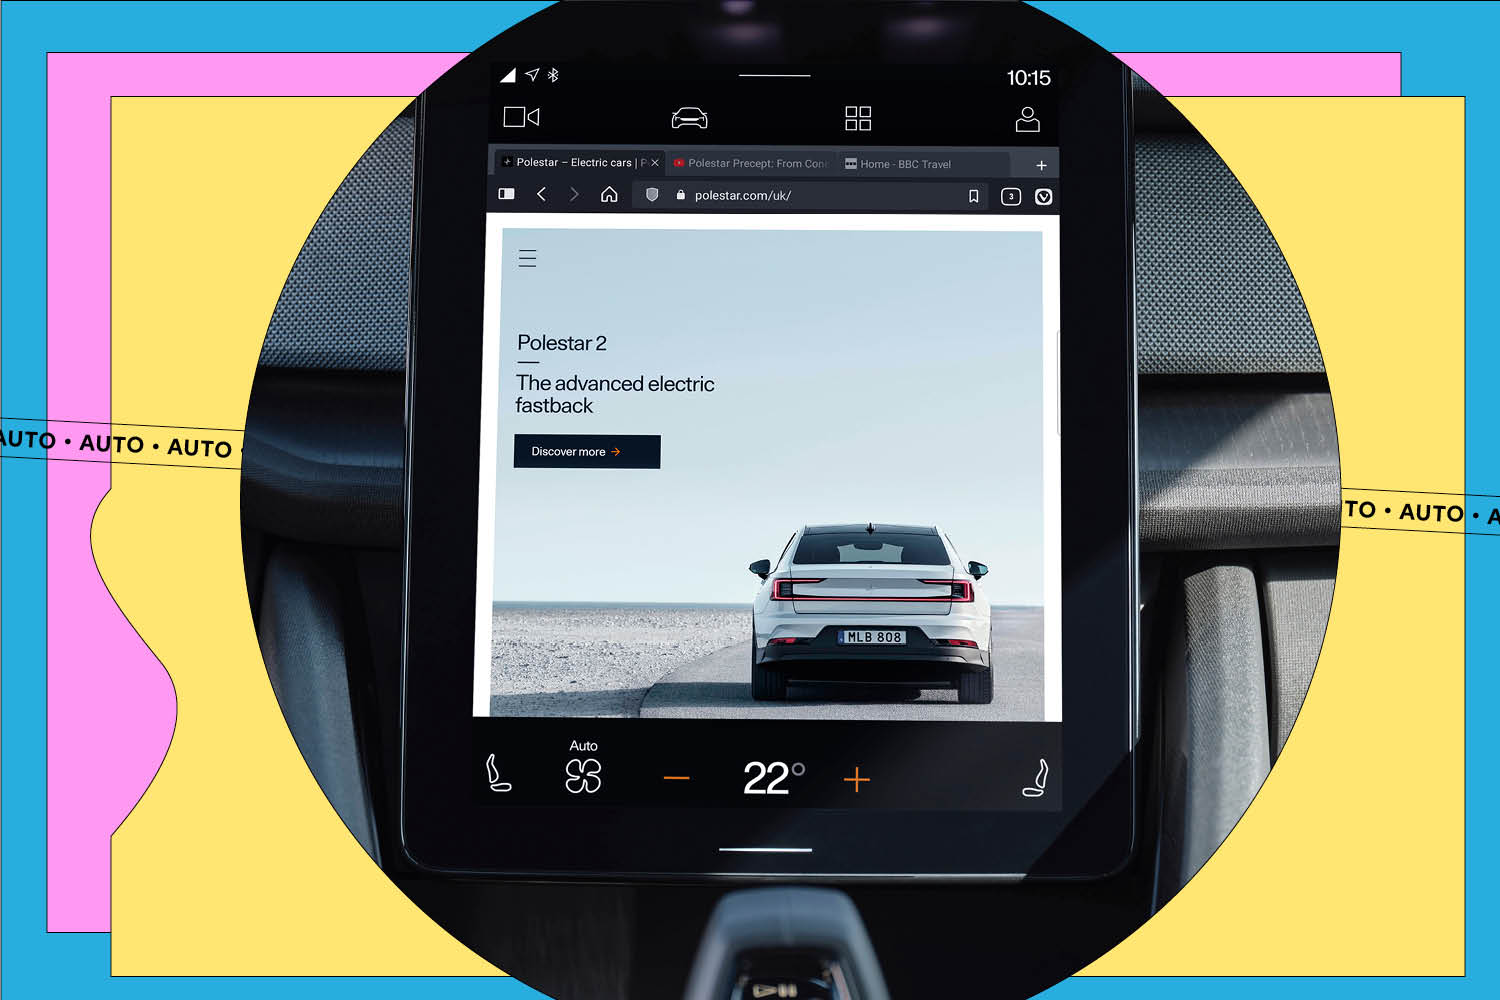 Best Auto Innovation of the year google android auto